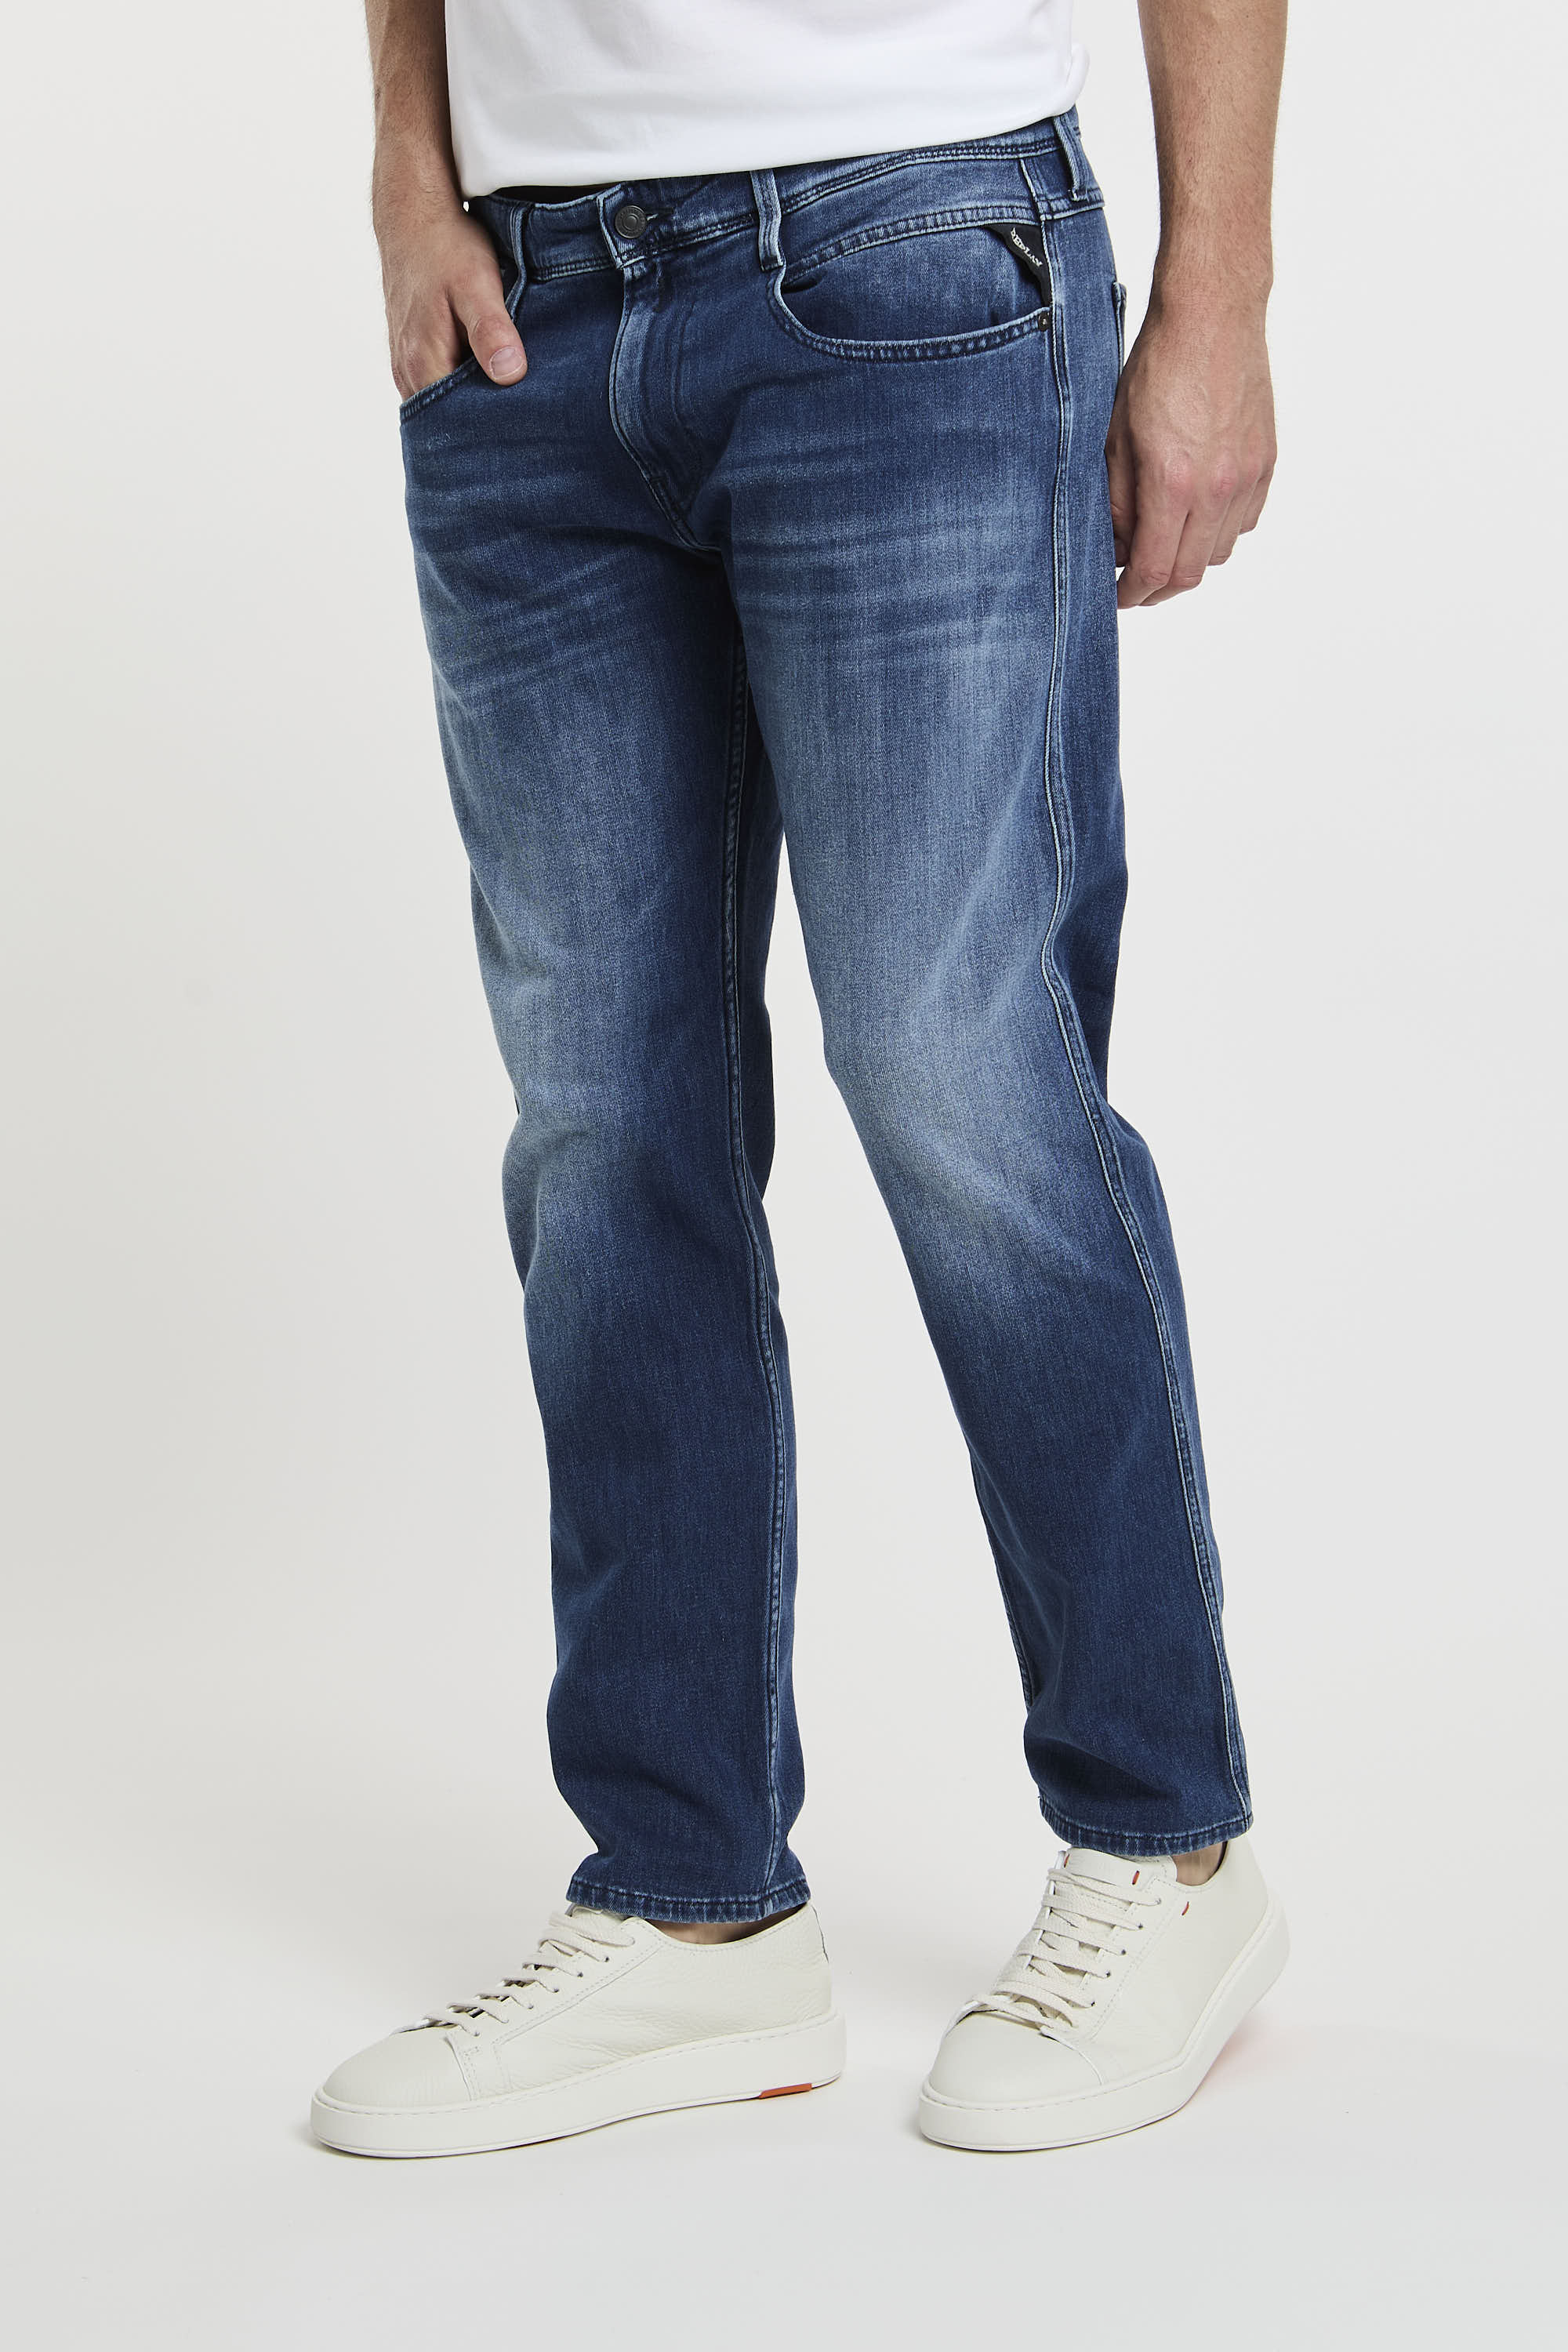 Replay Jeans Slim Fit Anbass Cotton/Polyester Denim-1